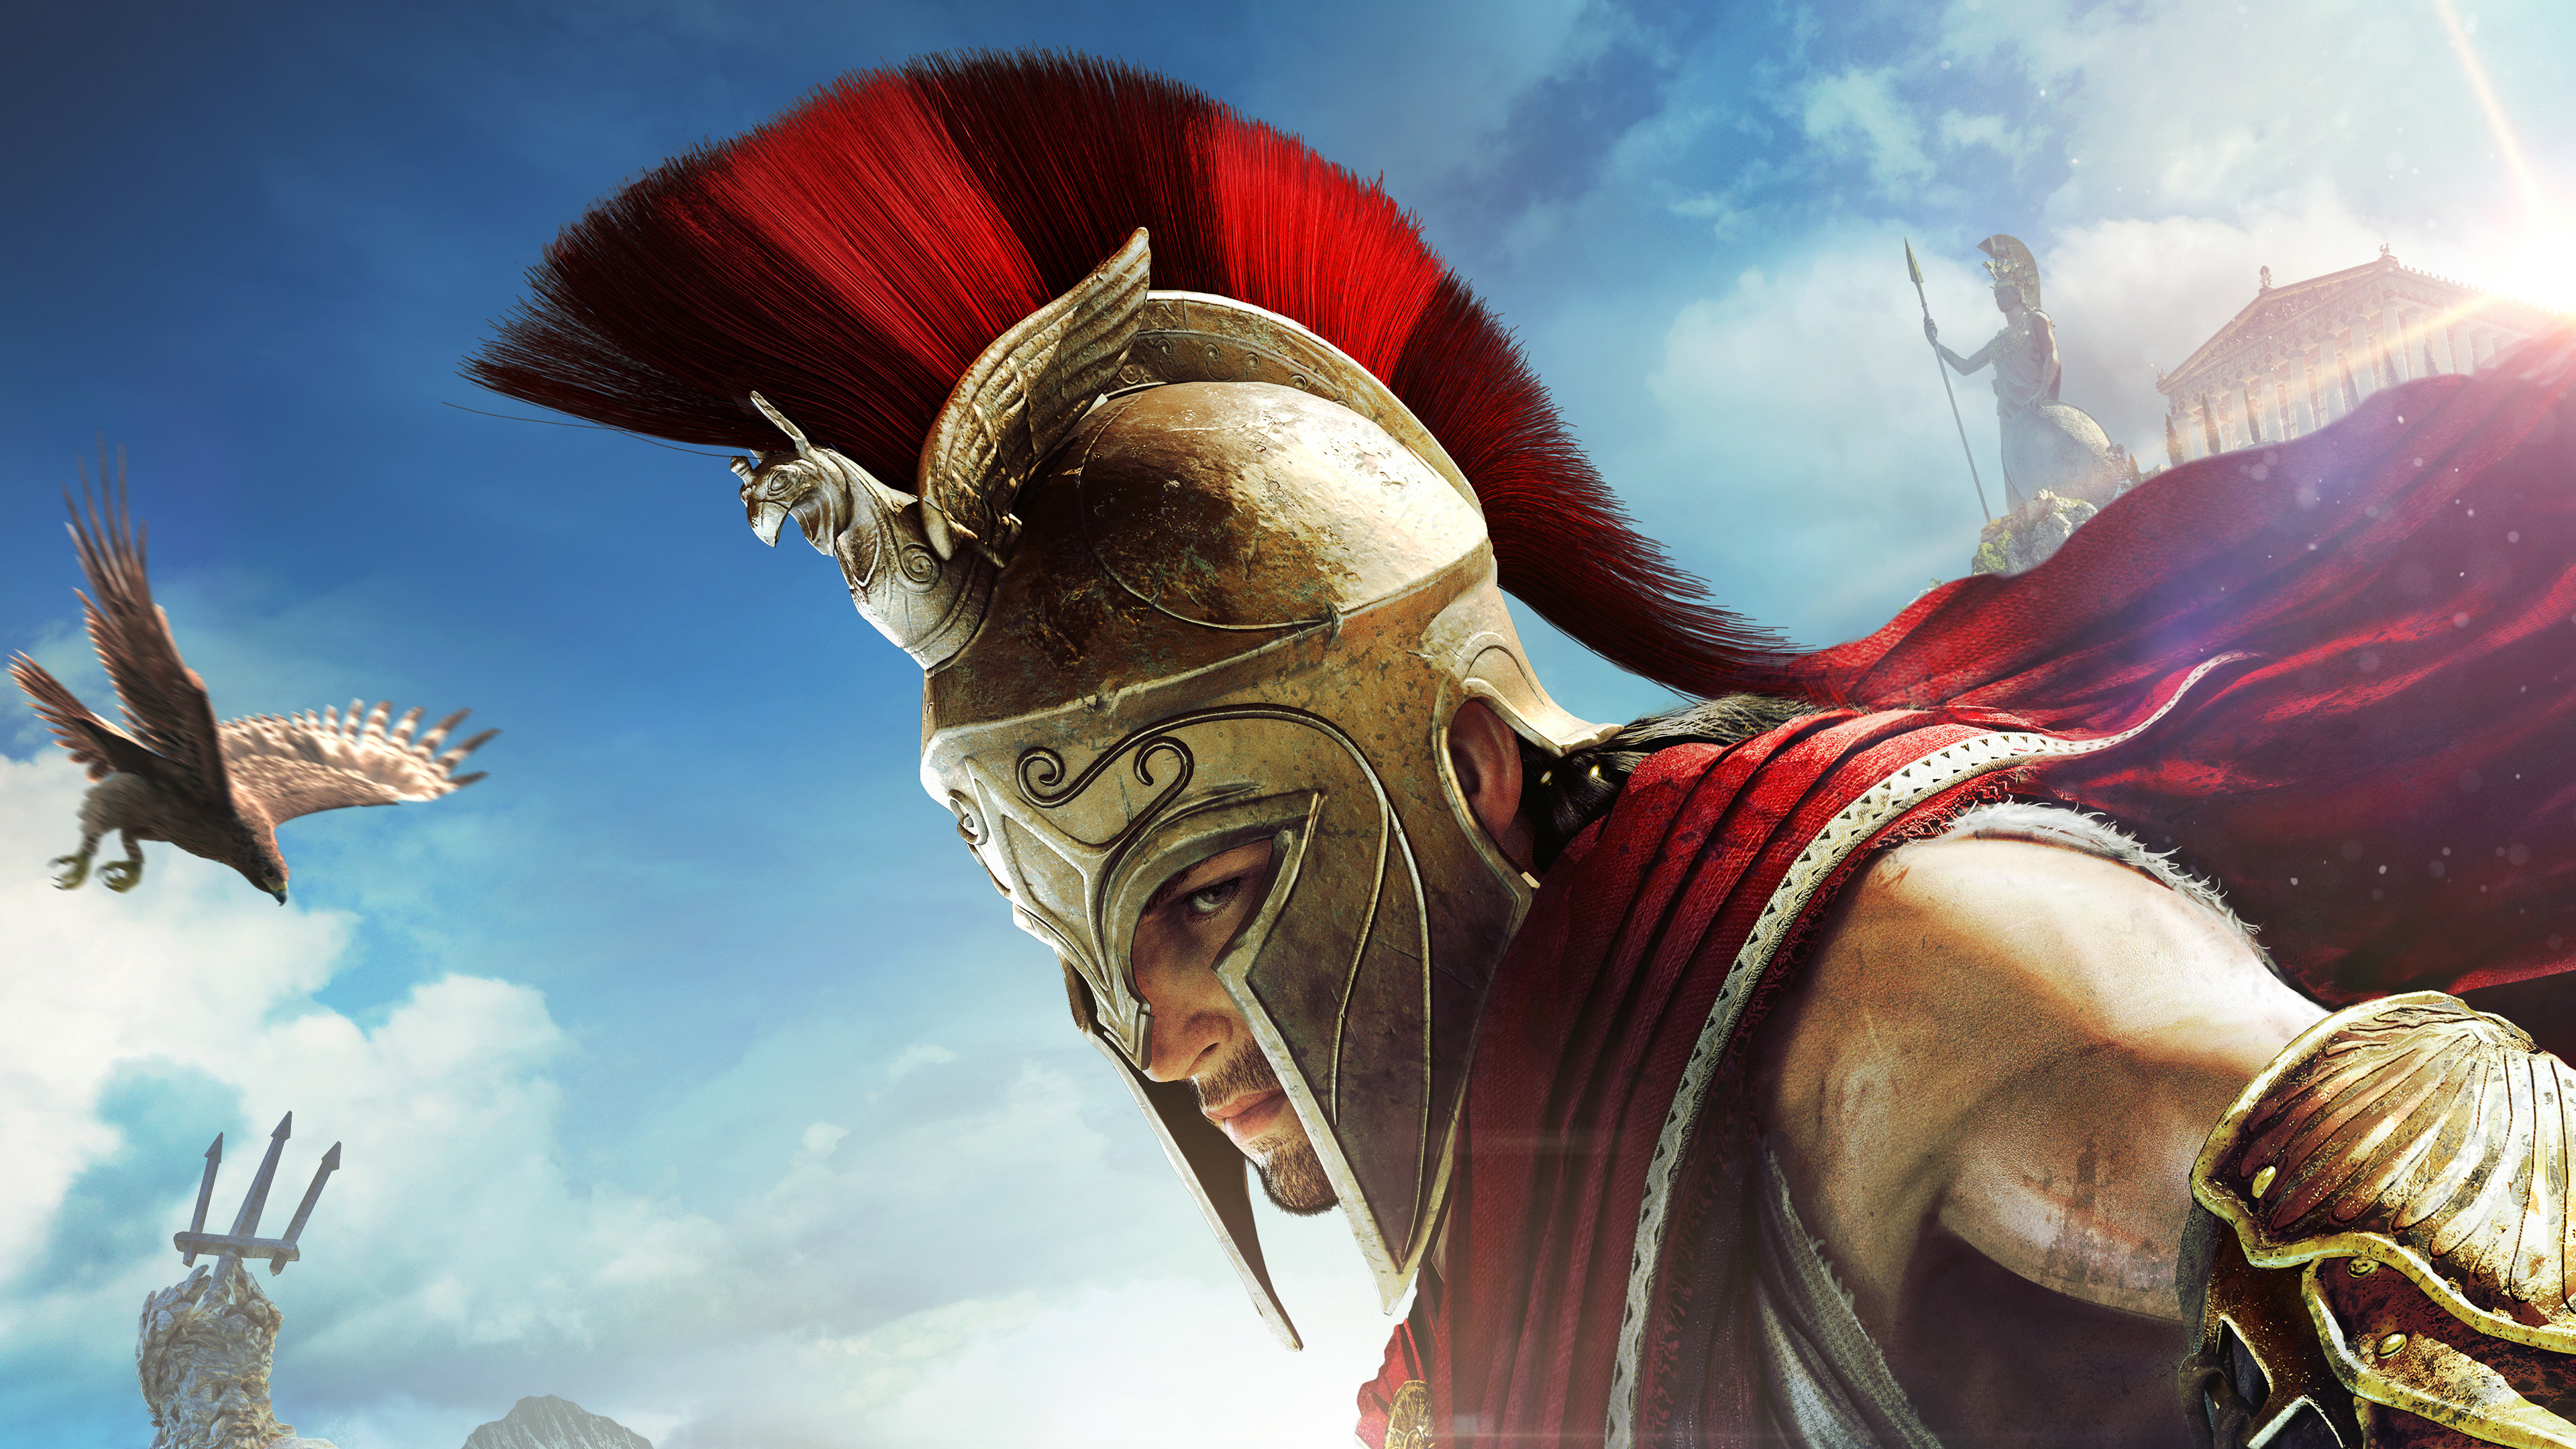 Assassin's Creed Odyssey Legacy of the First Blade